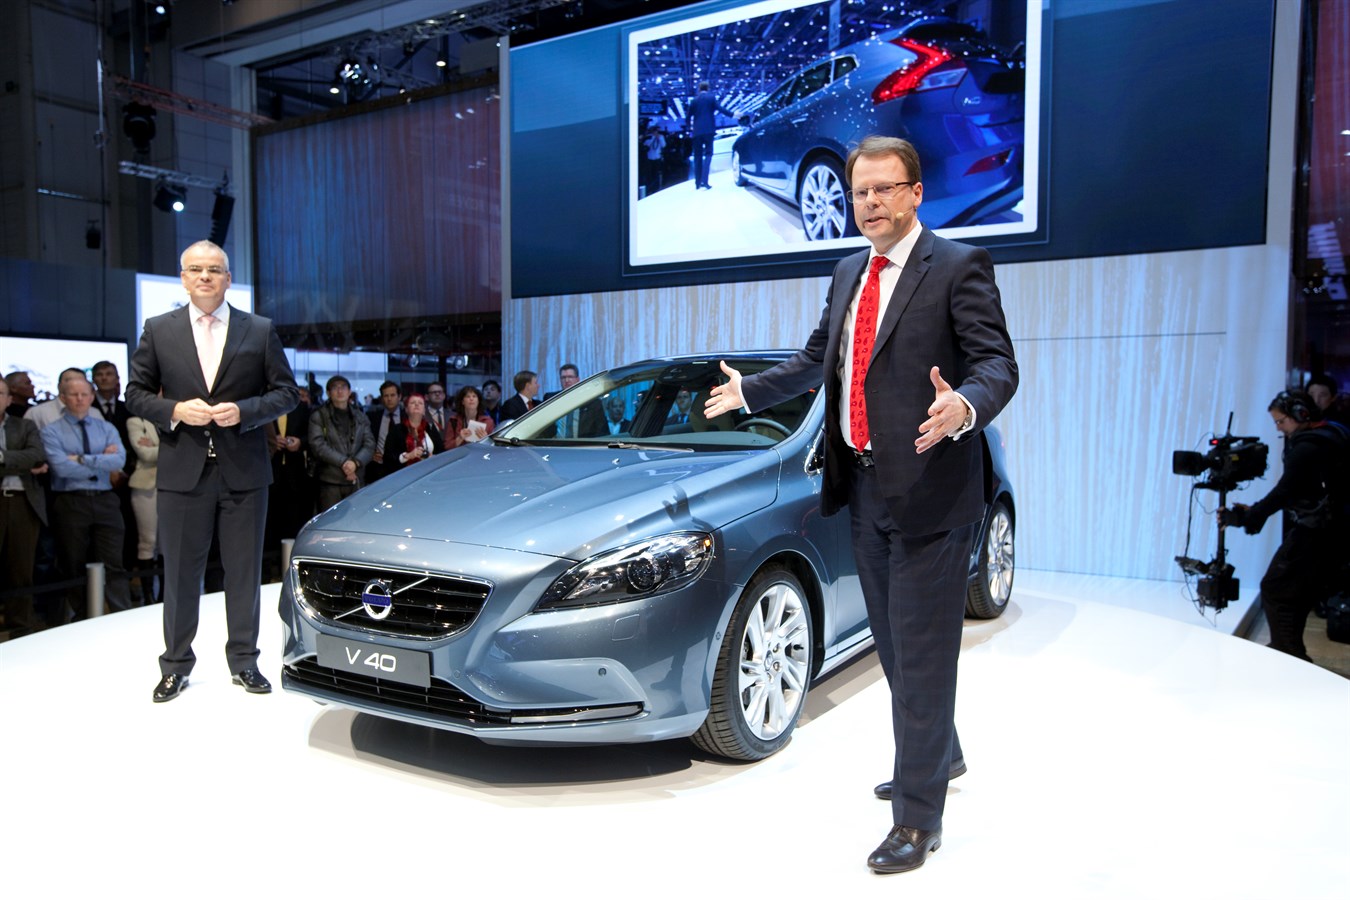 The all-new Volvo V40 unveiling at the 2012 Geneva Motor Show